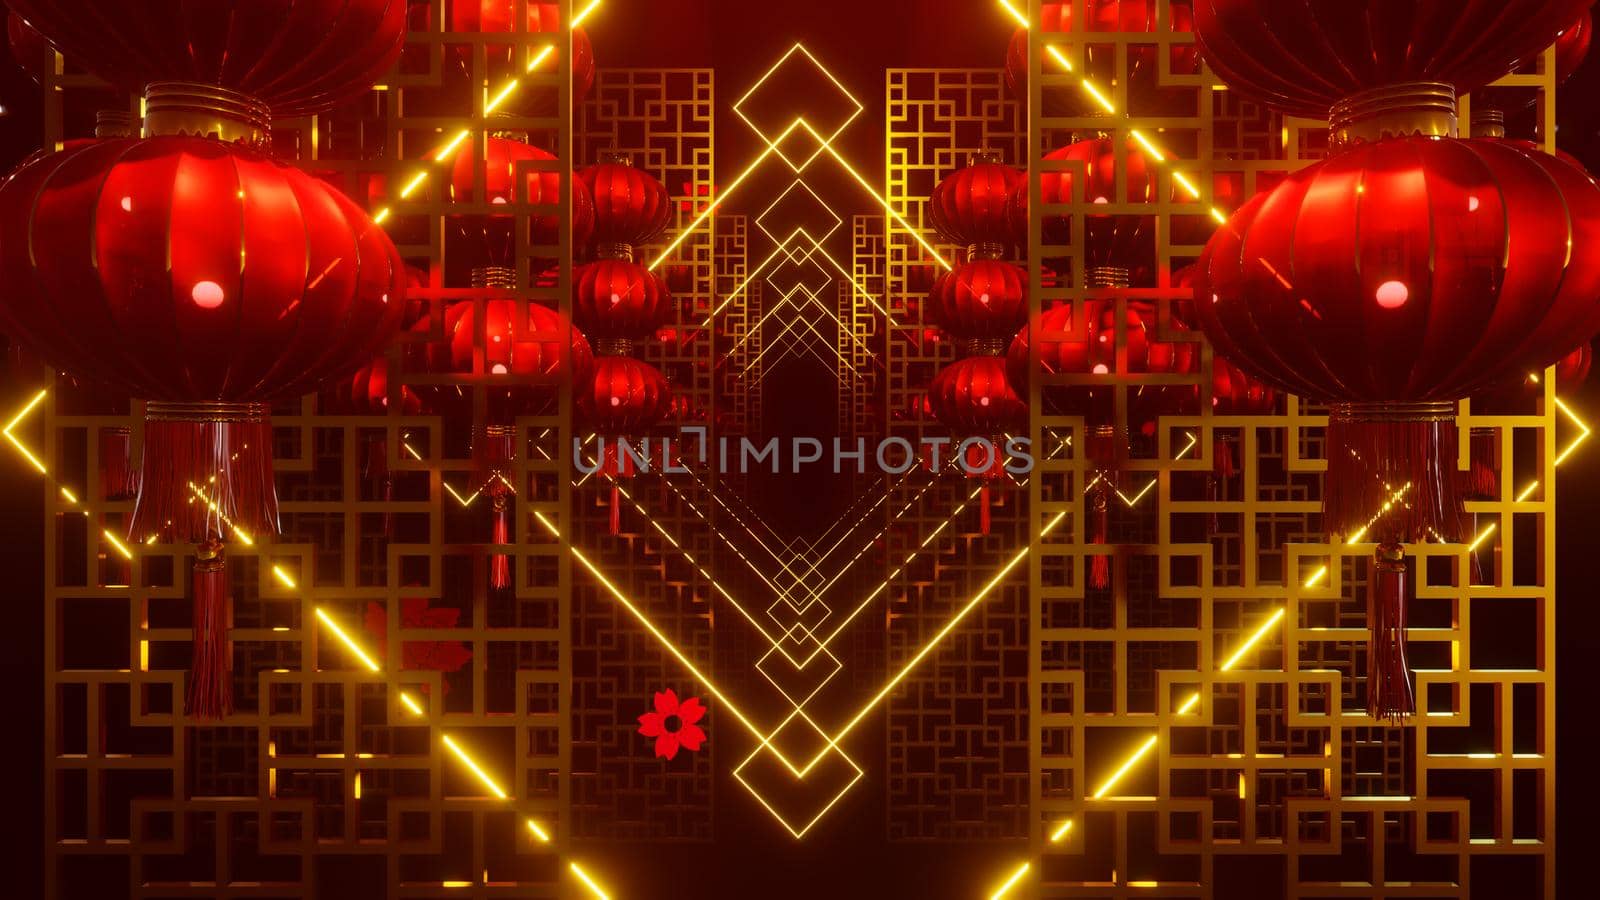 3D illustration Background for advertising and wallpaper in festival and chinese celebrate scene. 3D rendering in decorative concept.